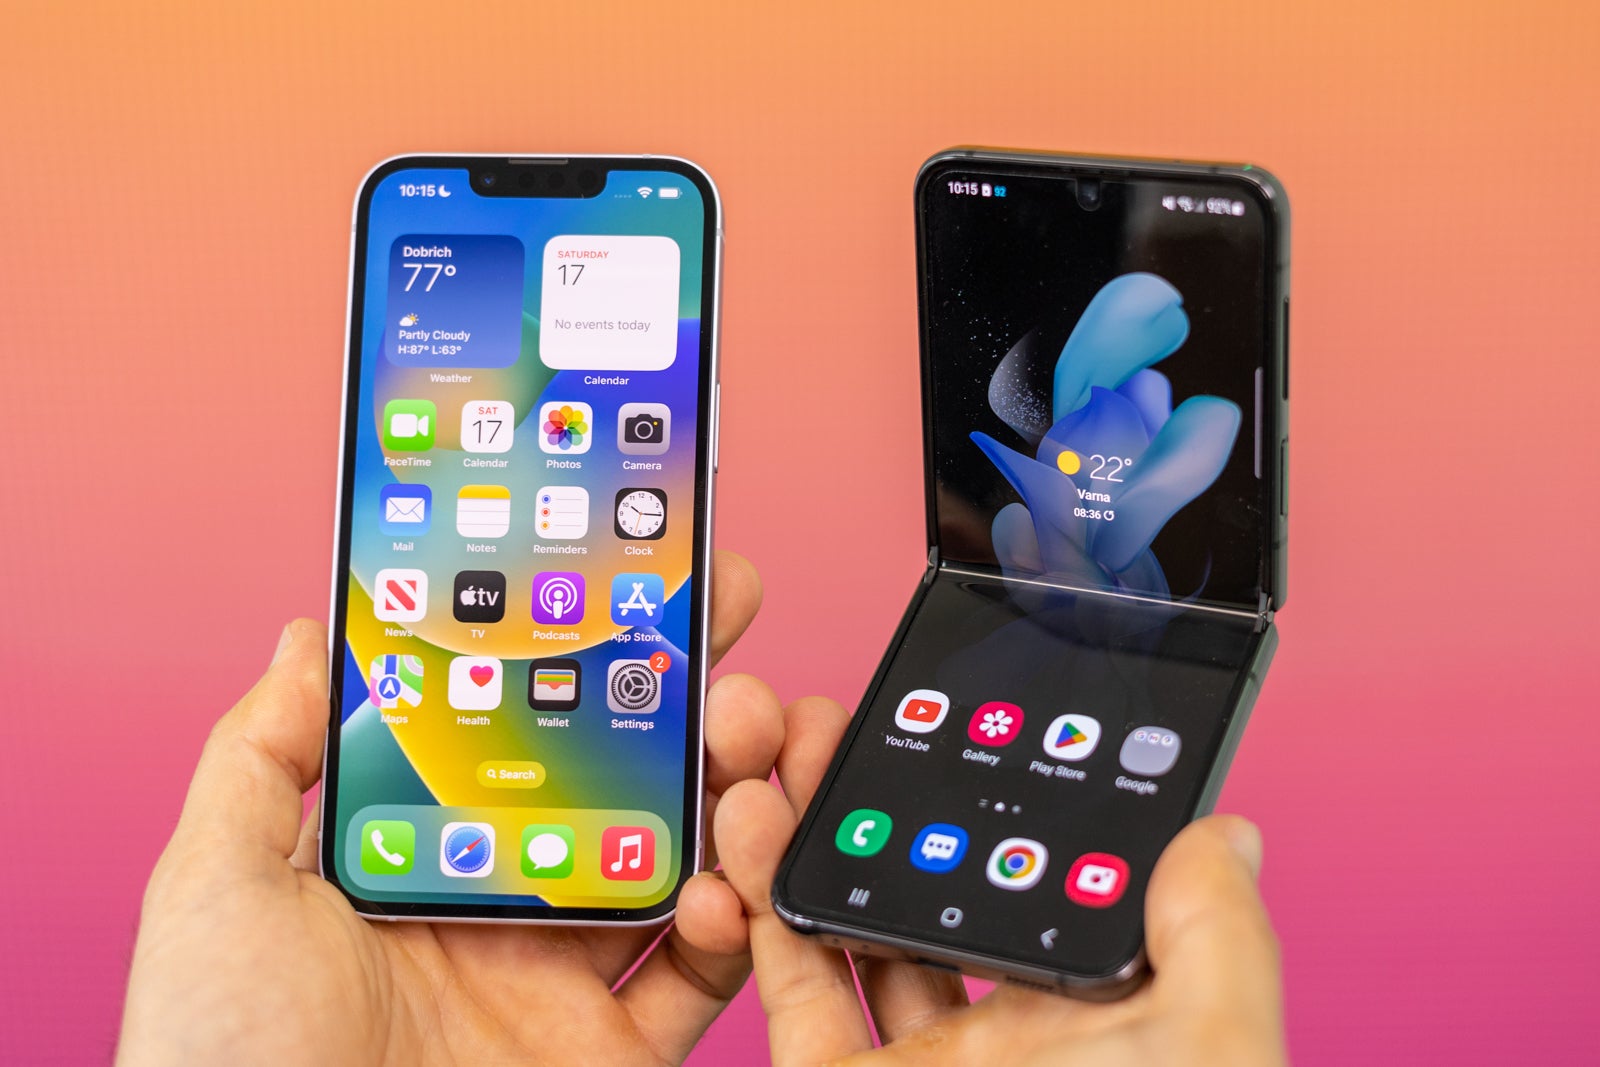 (Image credit - PhoneArena) The iPhone is outselling every single Samsung phone by a big margin, why bother going foldable? - The foldable iPhone is a pipe dream: here’s why Apple probably won’t do it